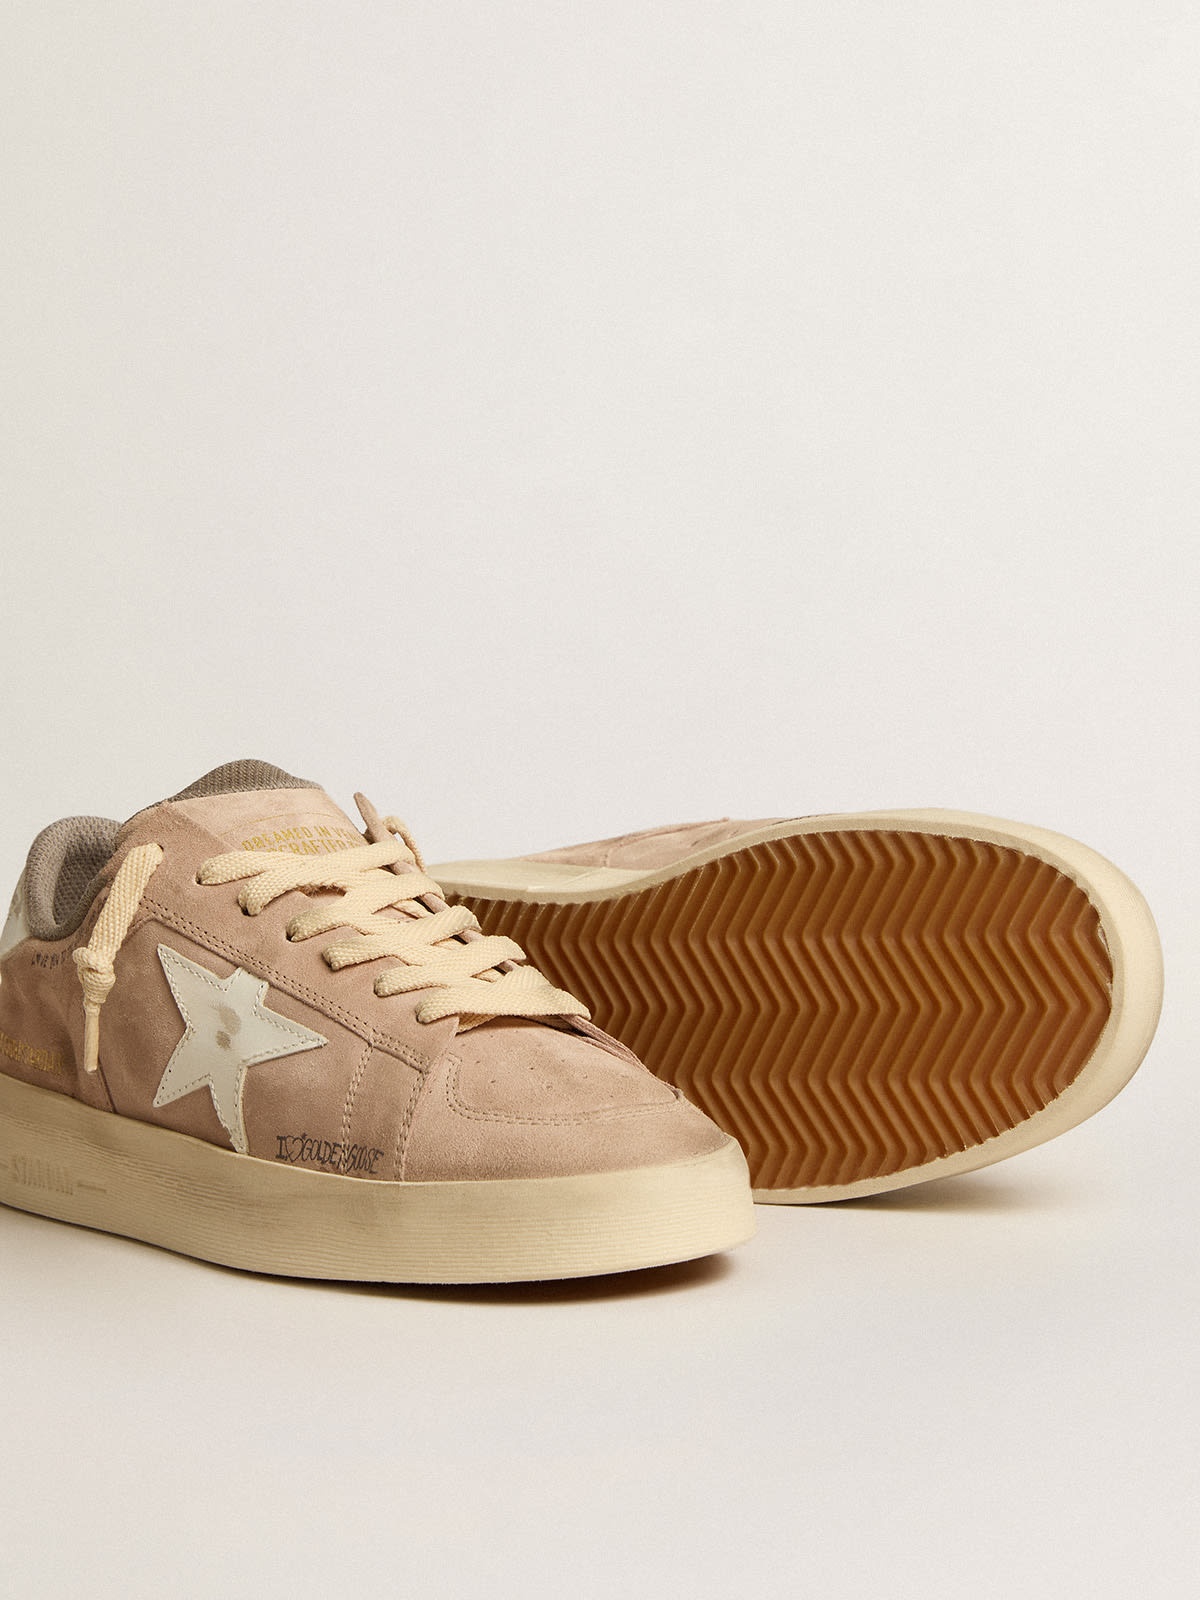 Stardan in old rose suede with white leather star and heel tab - 3